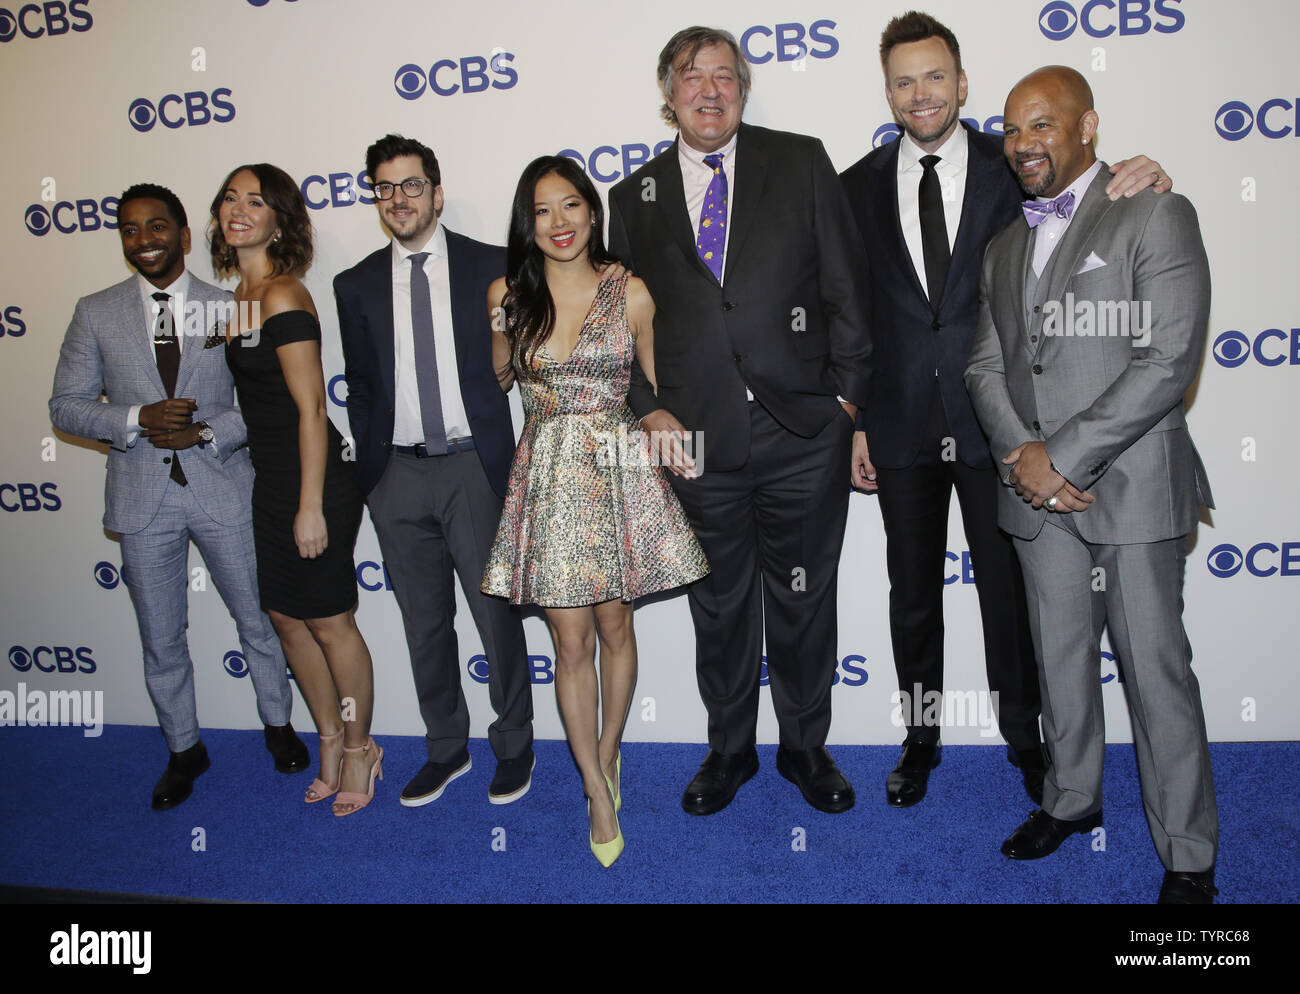 Chris Williams, Christopher Mintz-Plasse, Susannah Fielding, Christine Ko, Joel McHale, Stephen Fry arrive on the red carpet at the 2016 CBS Upfront at Oak Room on May 18, 2016 in New York City.    Photo by John Angelillo/UPI Stock Photo